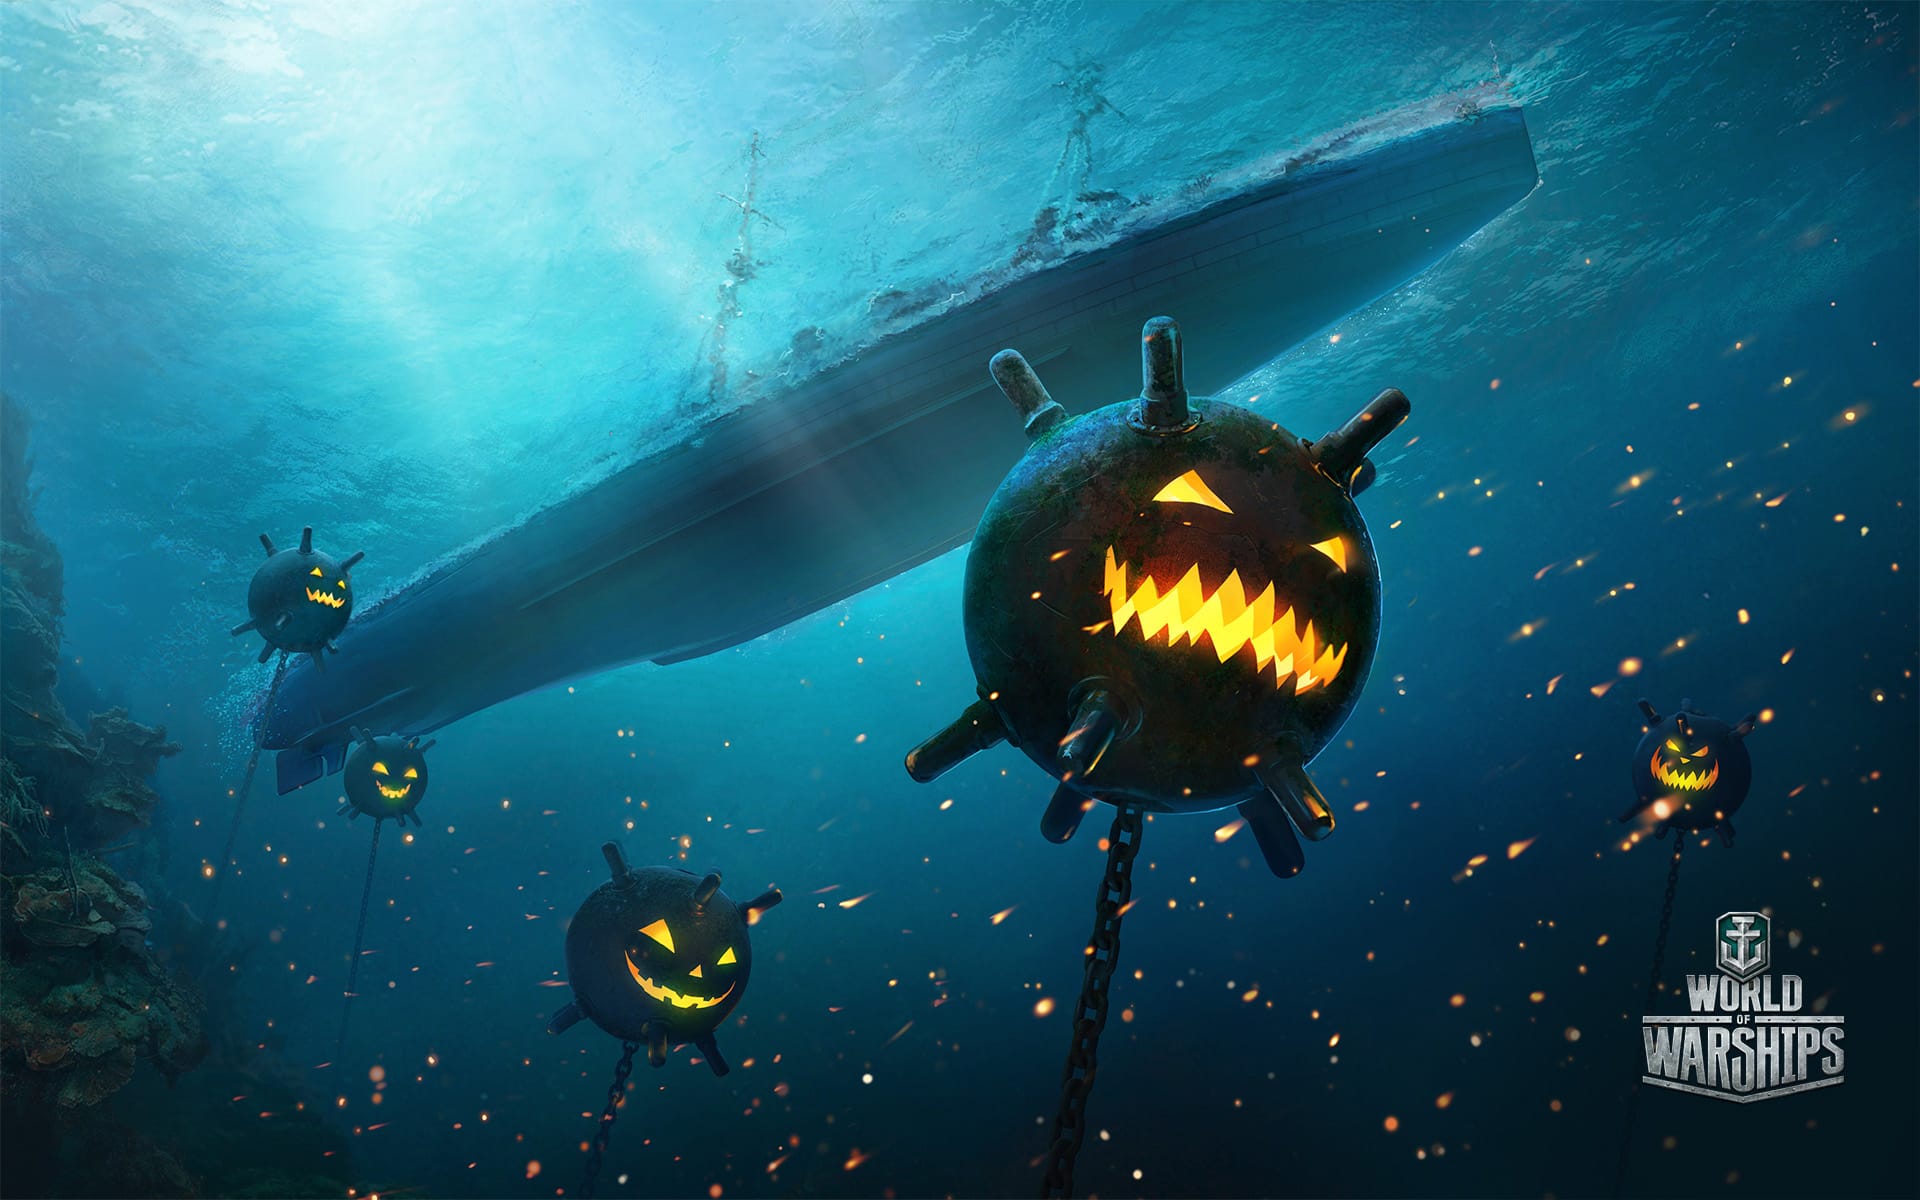 Sea mines in the form of Halloween pumpkins